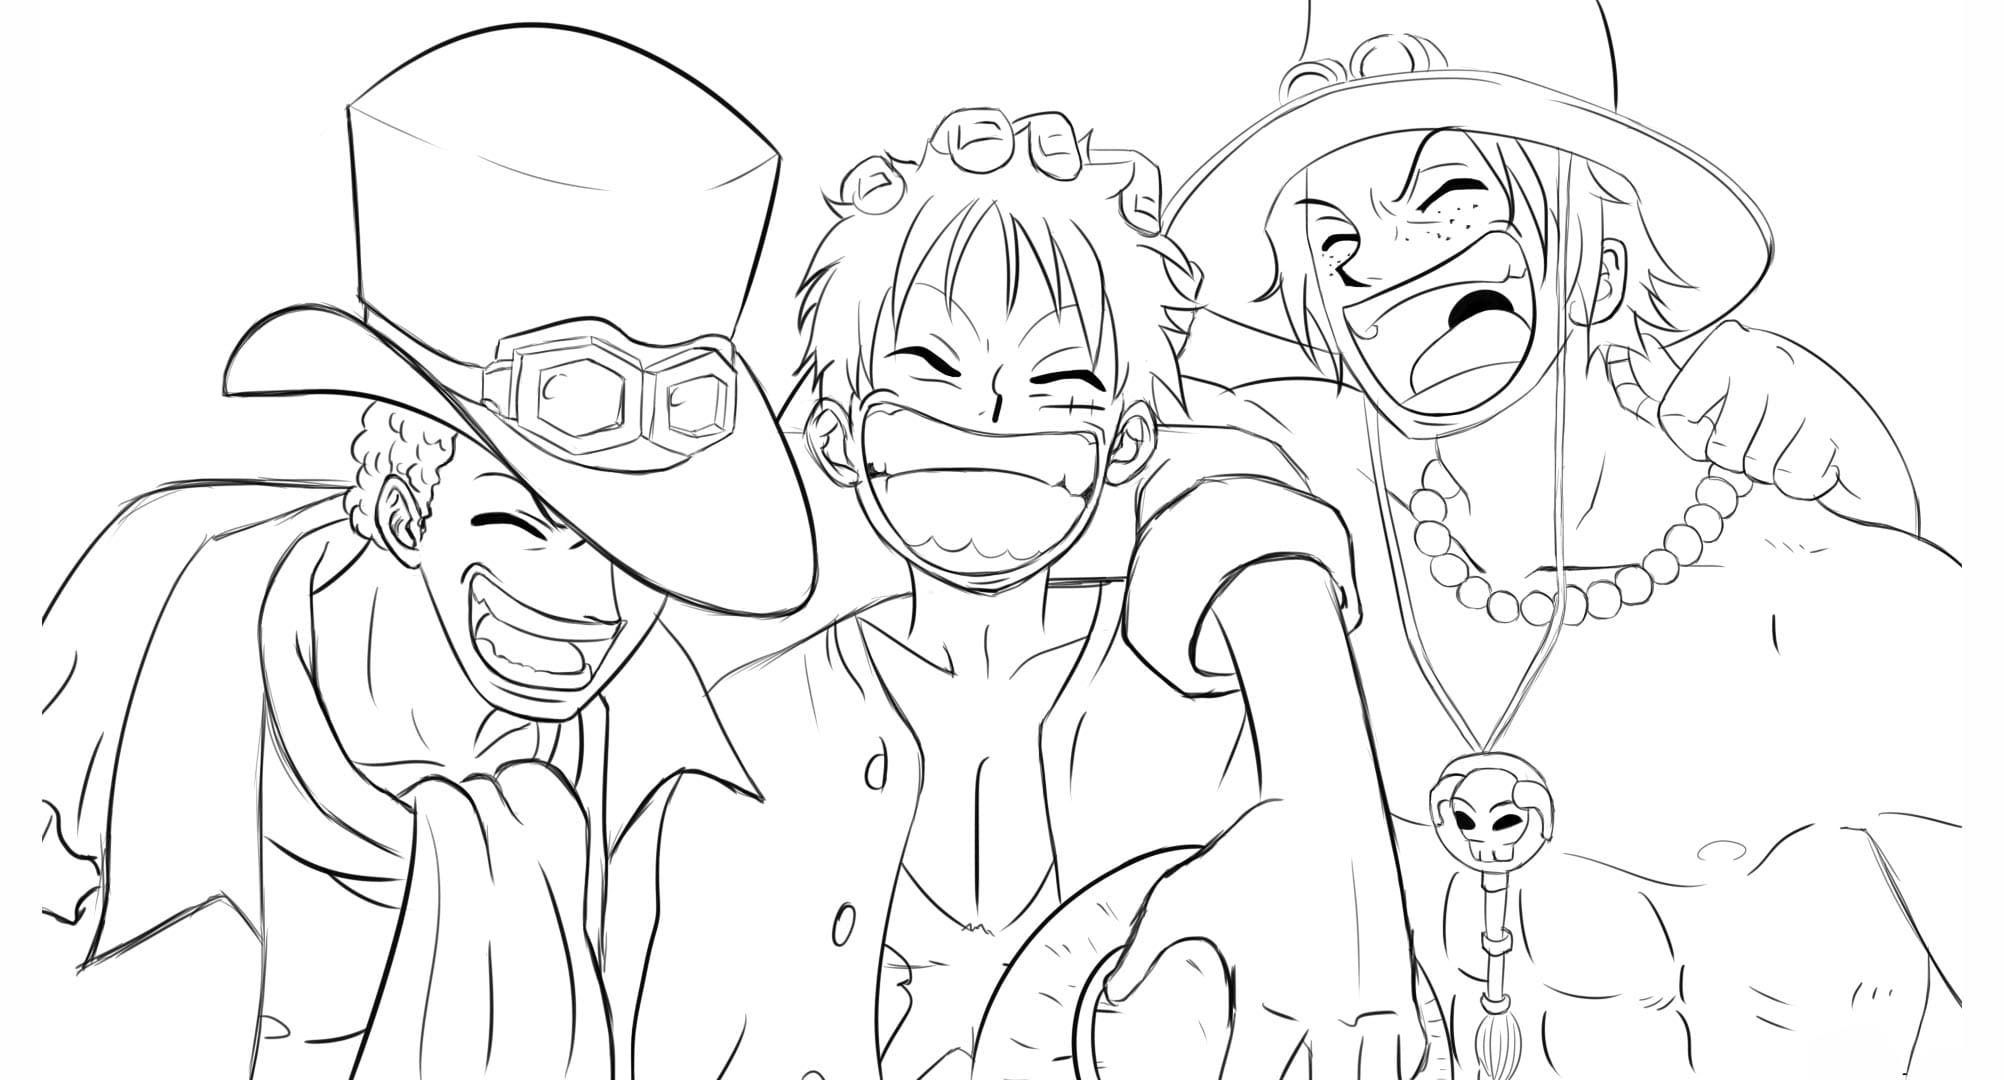 Luffy and Brothers